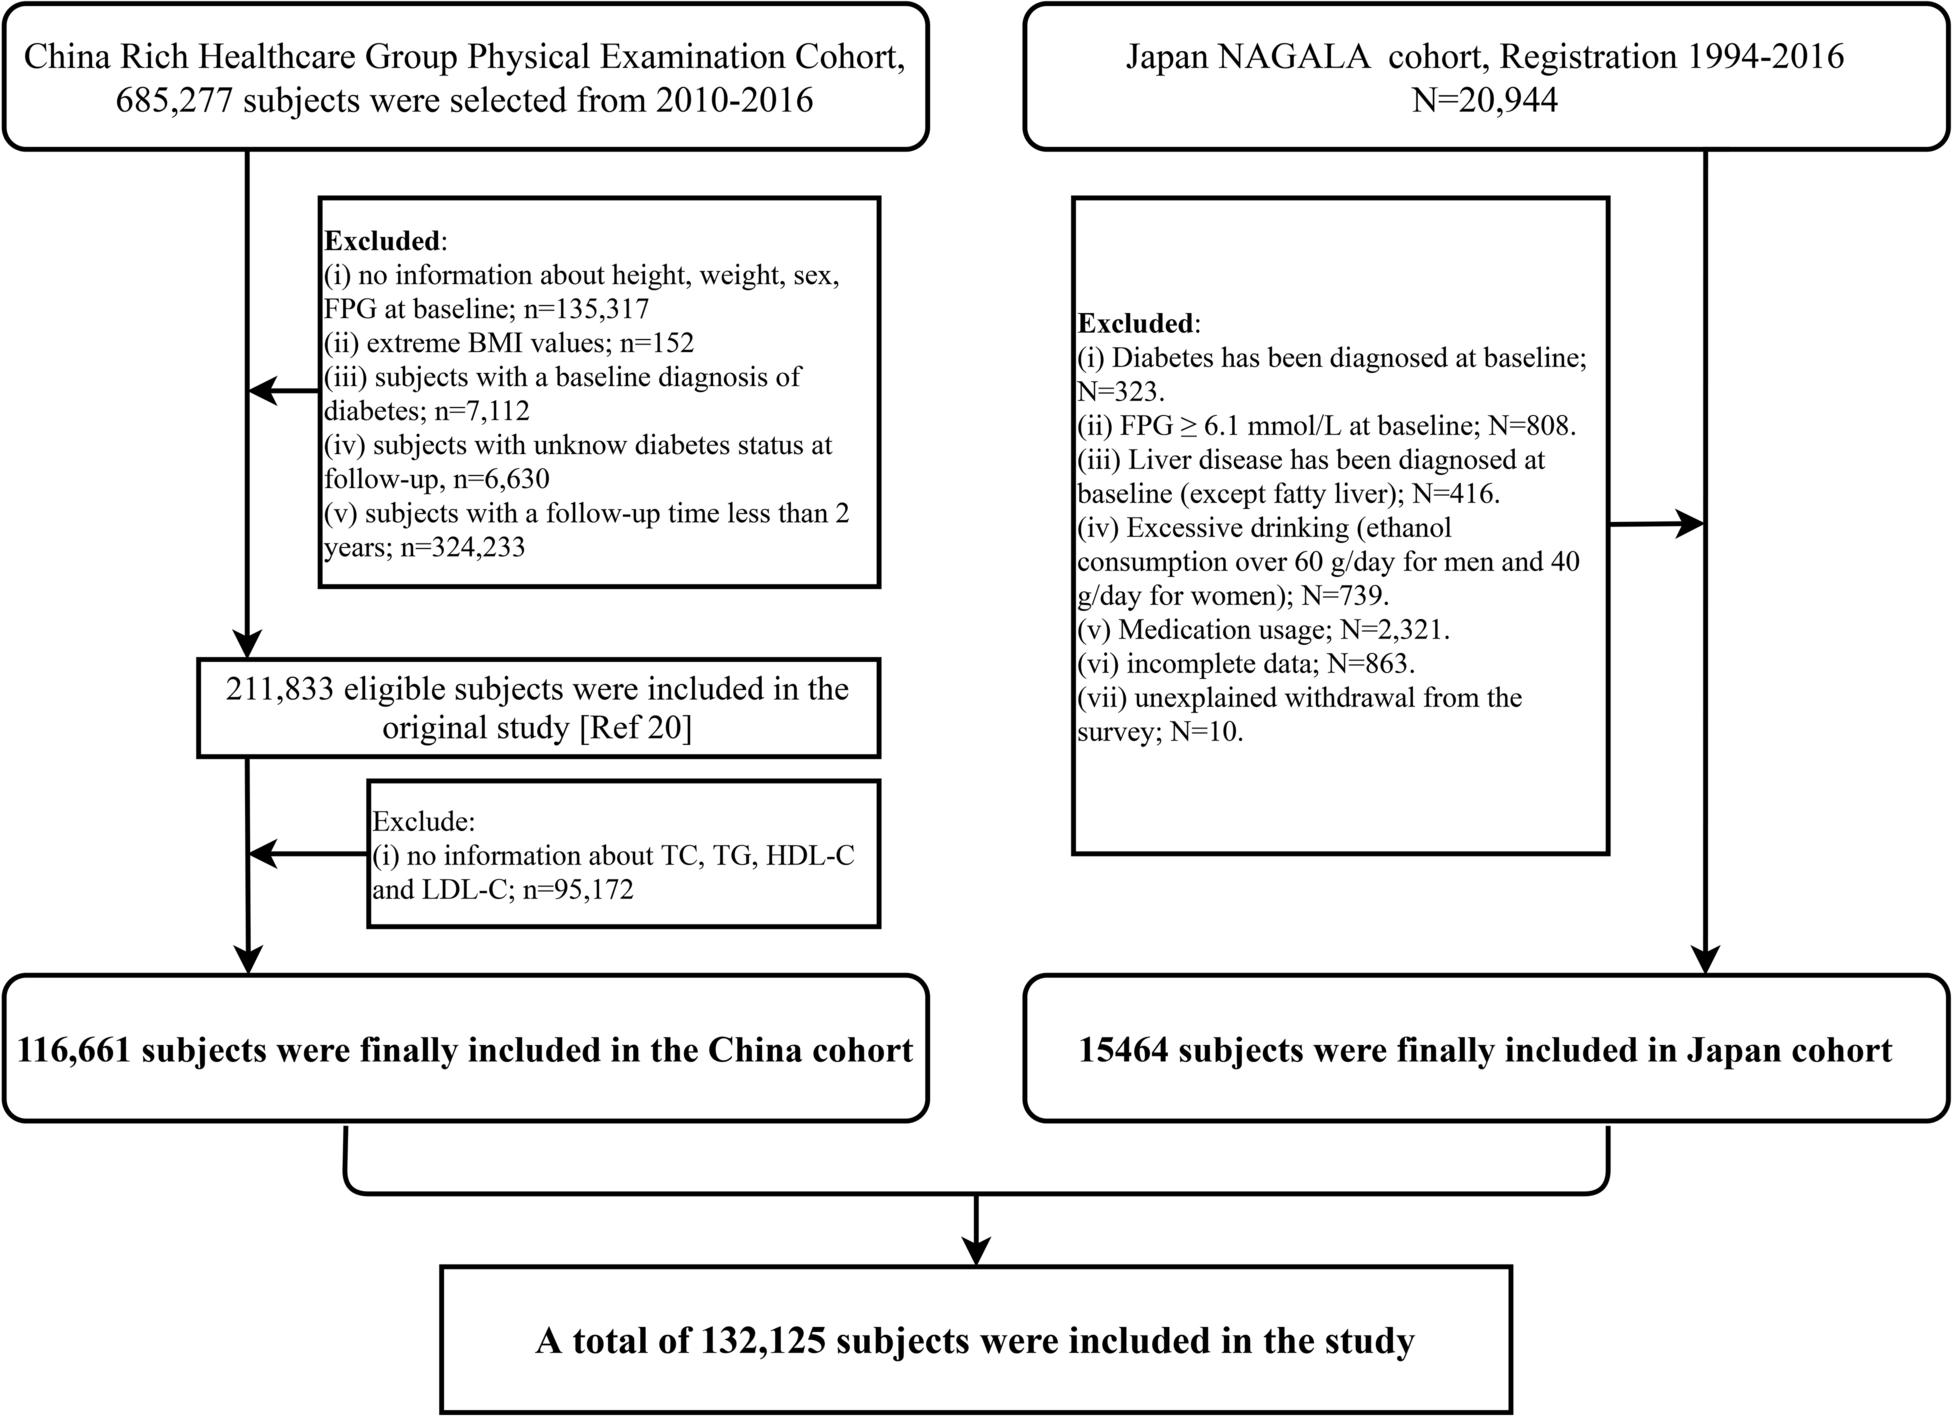 Predictive value of insulin resistance surrogates for the development of diabetes in individuals with baseline normoglycemia: findings from two independent cohort studies in China and Japan